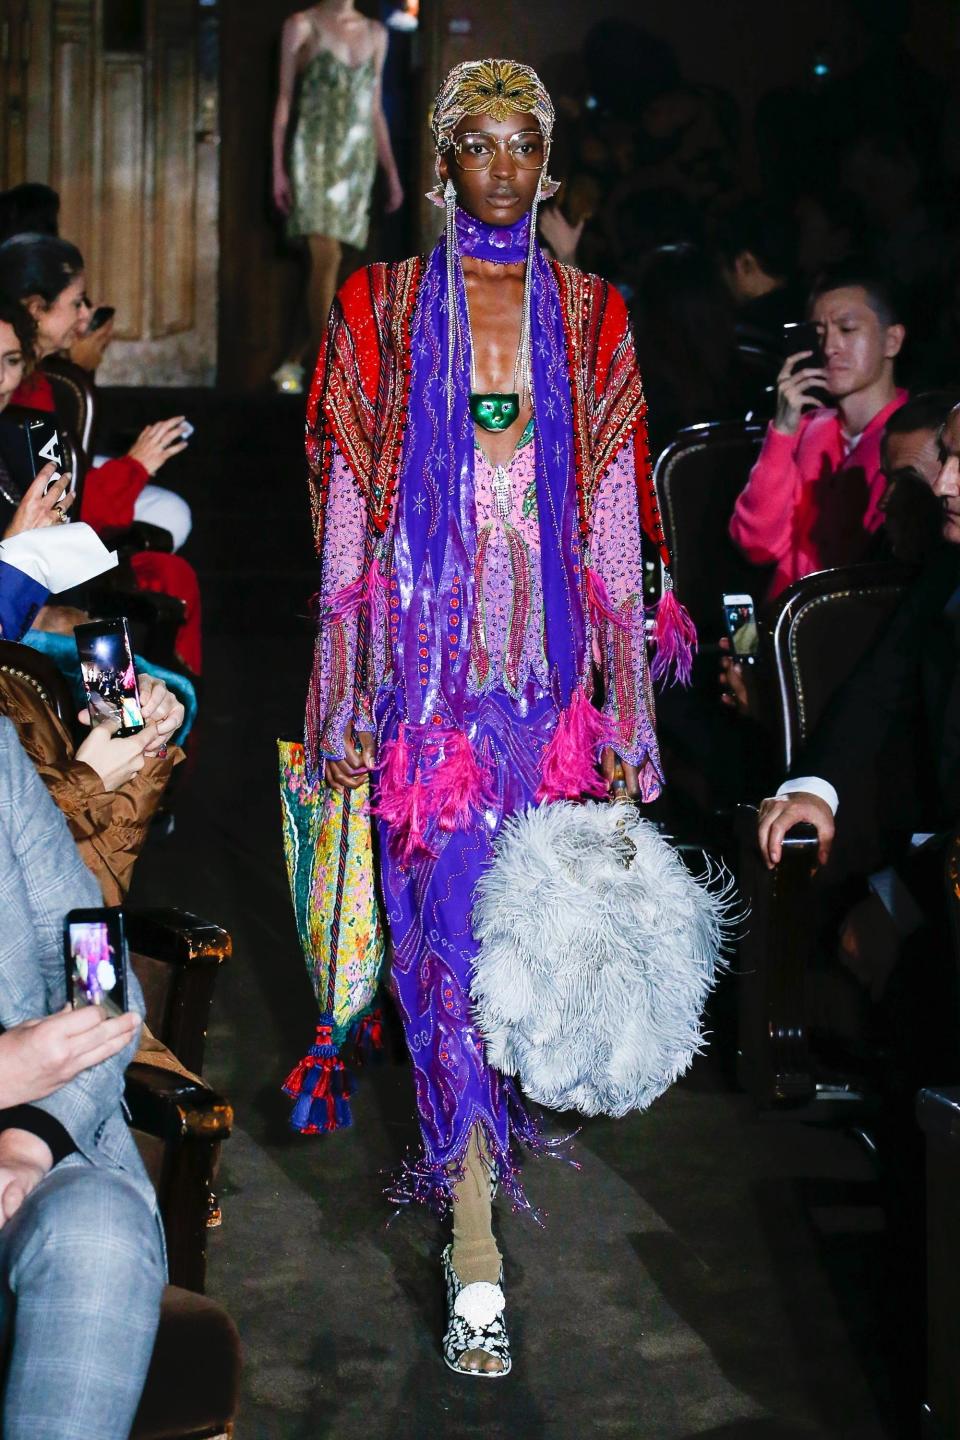 Will Hollywood embrace theatrical gowns from Matty Bovan or Marc Jacobs? Only time will tell.